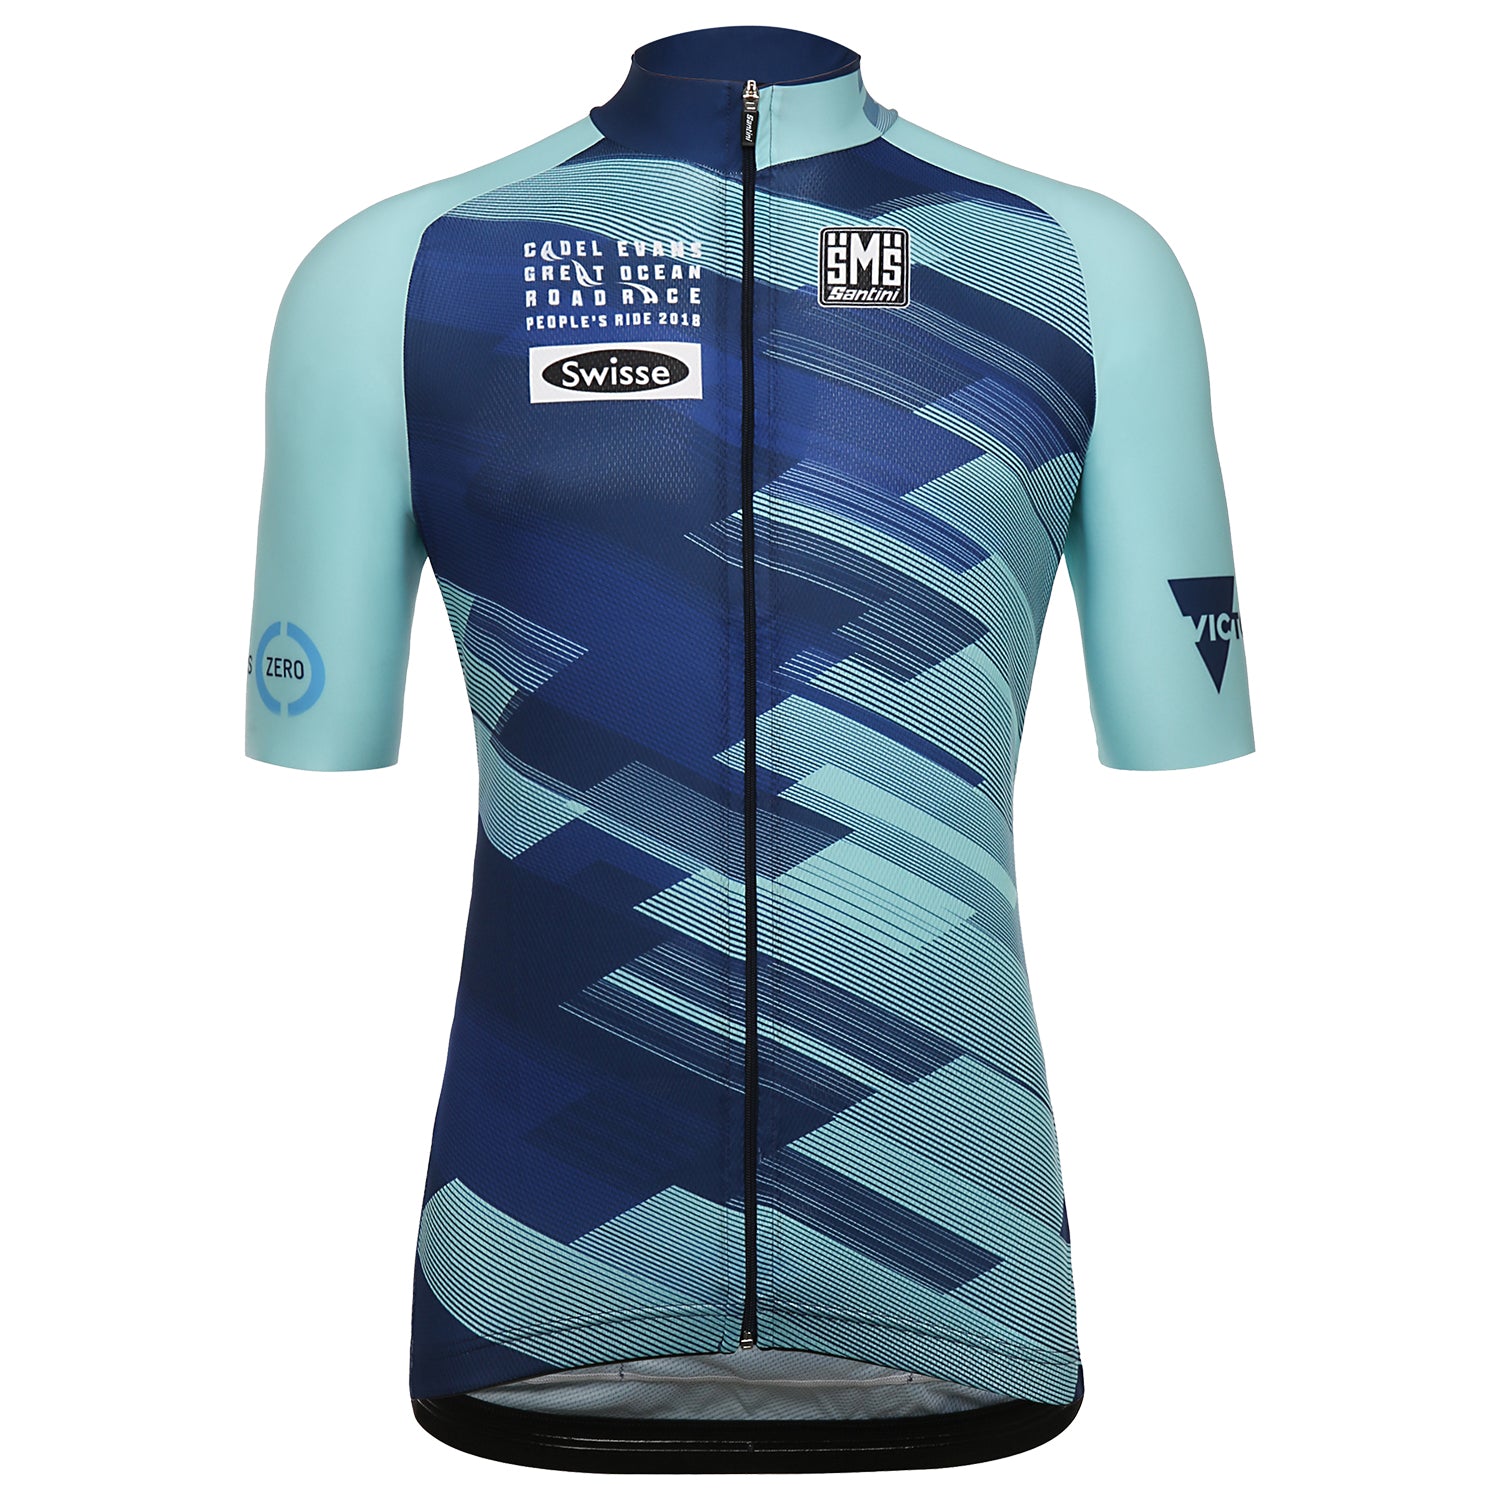 Cycling jerseys available to buy with short sleeves or long sleeves ...